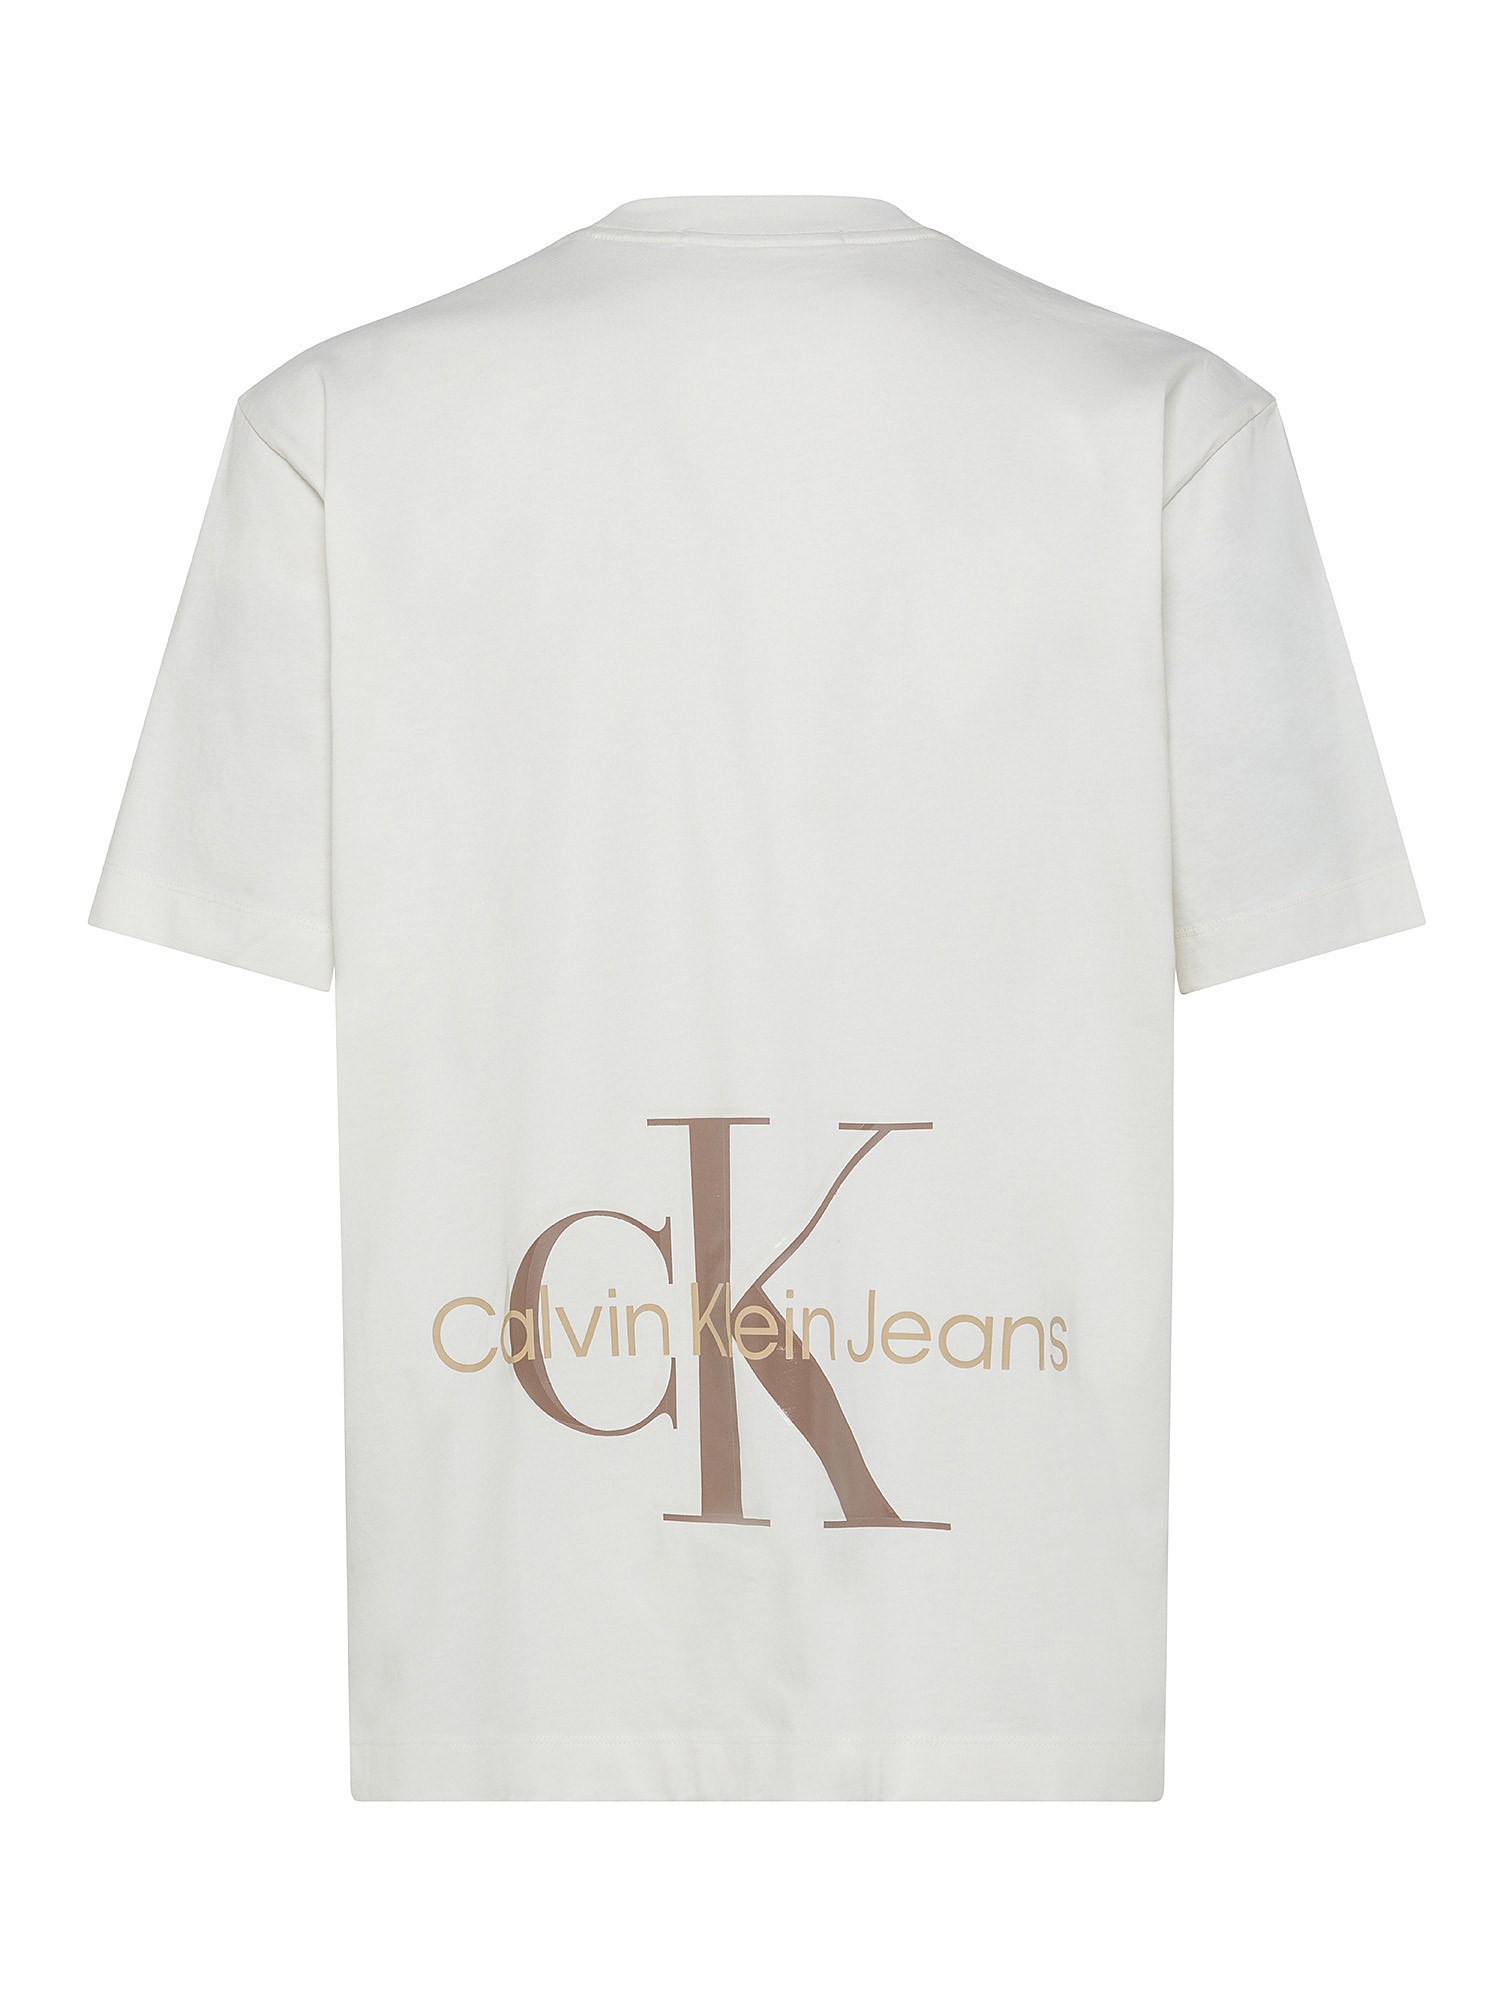 Calvin Klein Jeans - Relaxed fit T-shirt in organic cotton with logo, White, large image number 1